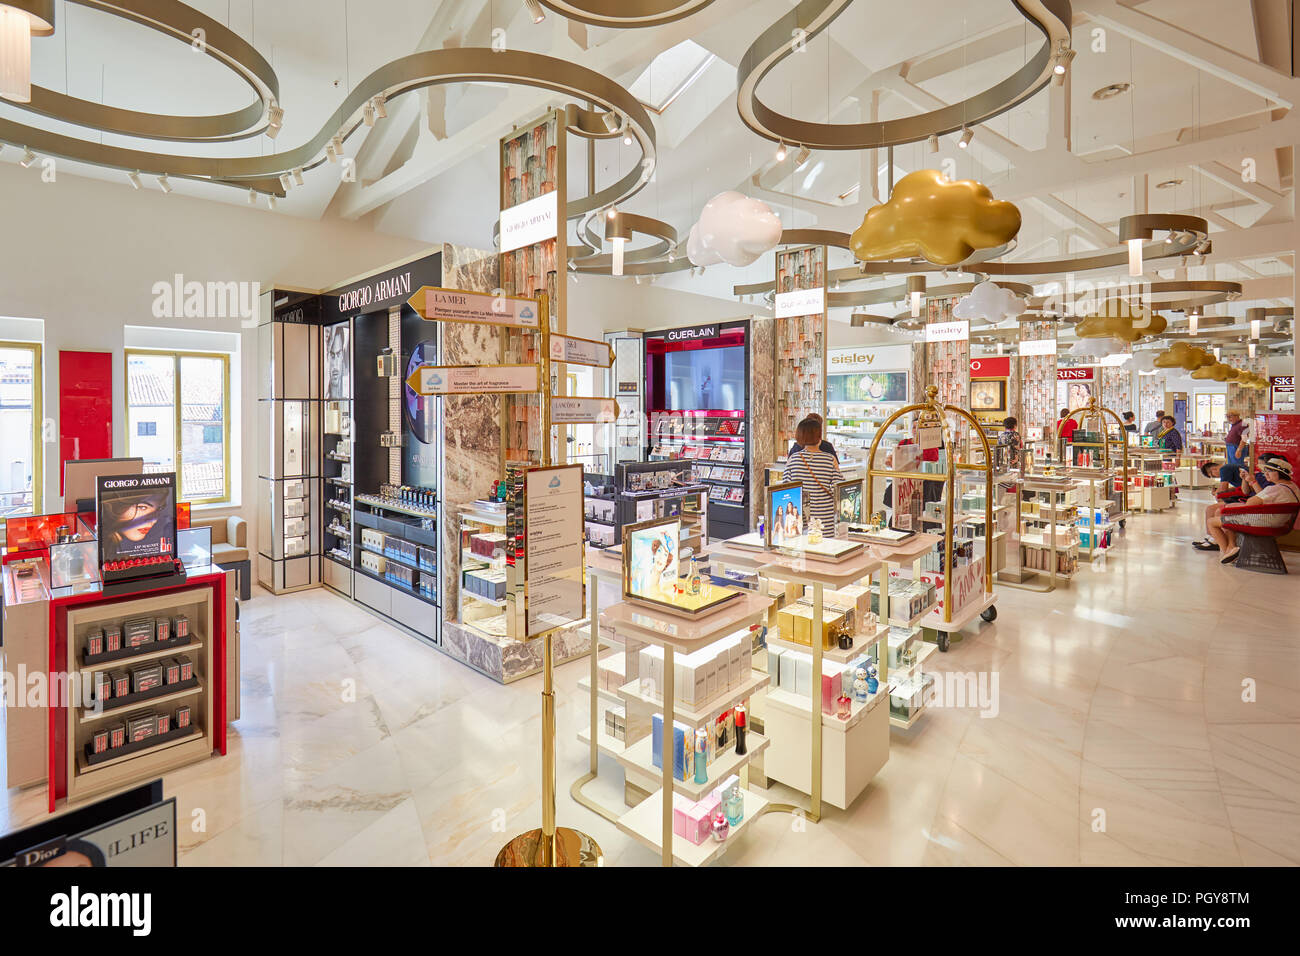 VENICE, ITALY - AUGUST 15, 2017: Fondaco dei Tedeschi, luxury department store interior, cosmetics and perfums area with people Stock Photo